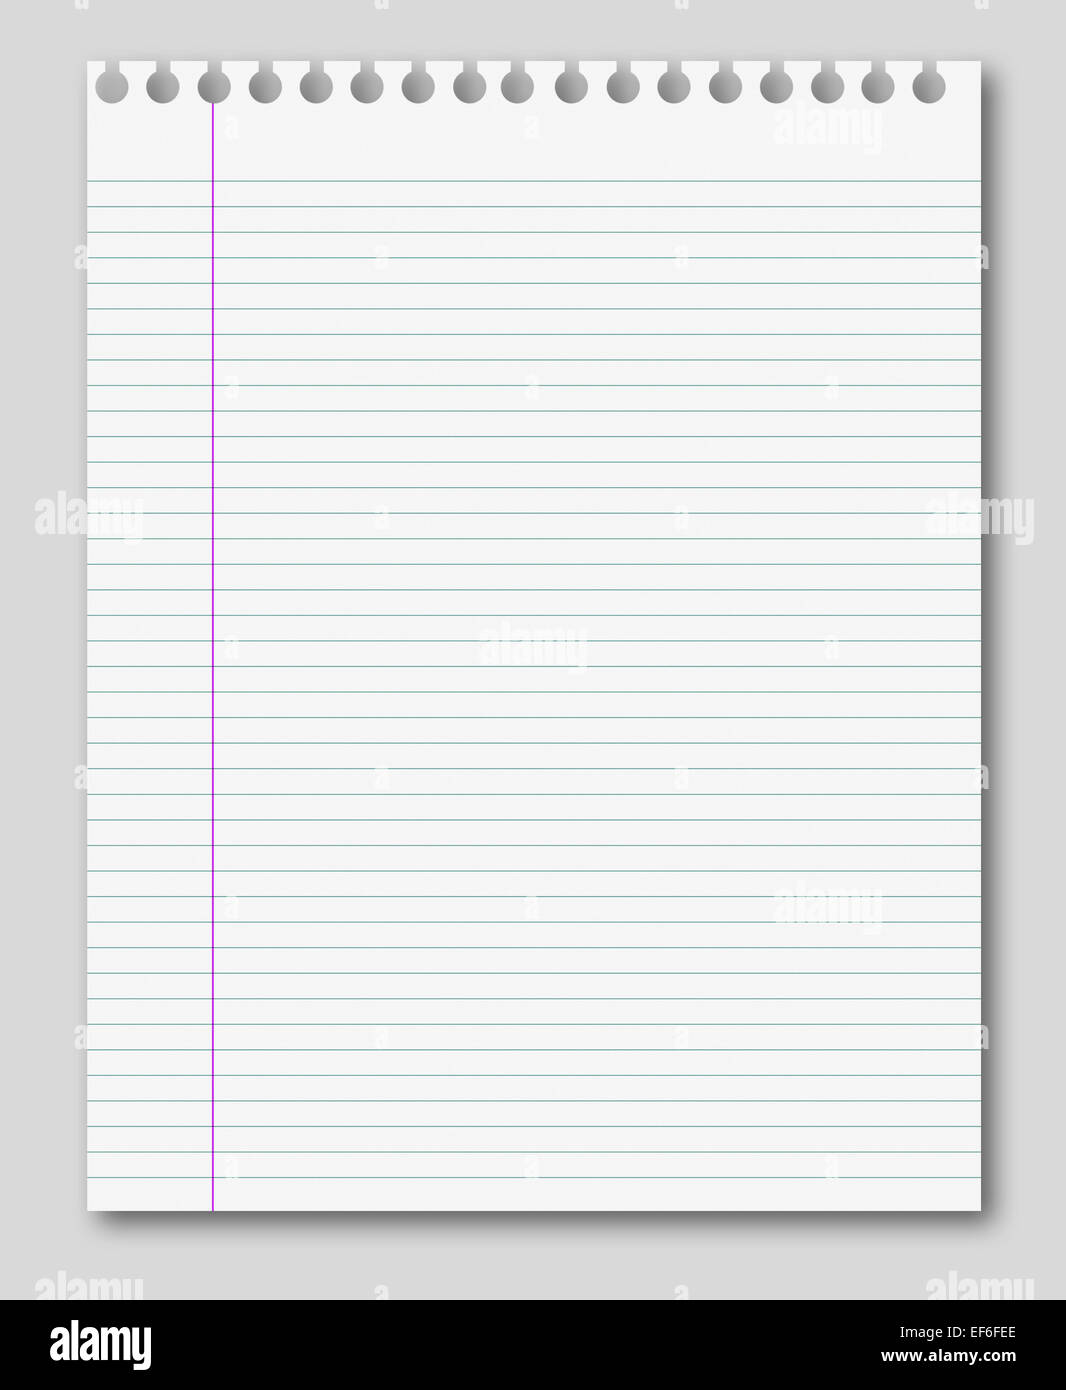 blank white paper background from lined page Stock Photo